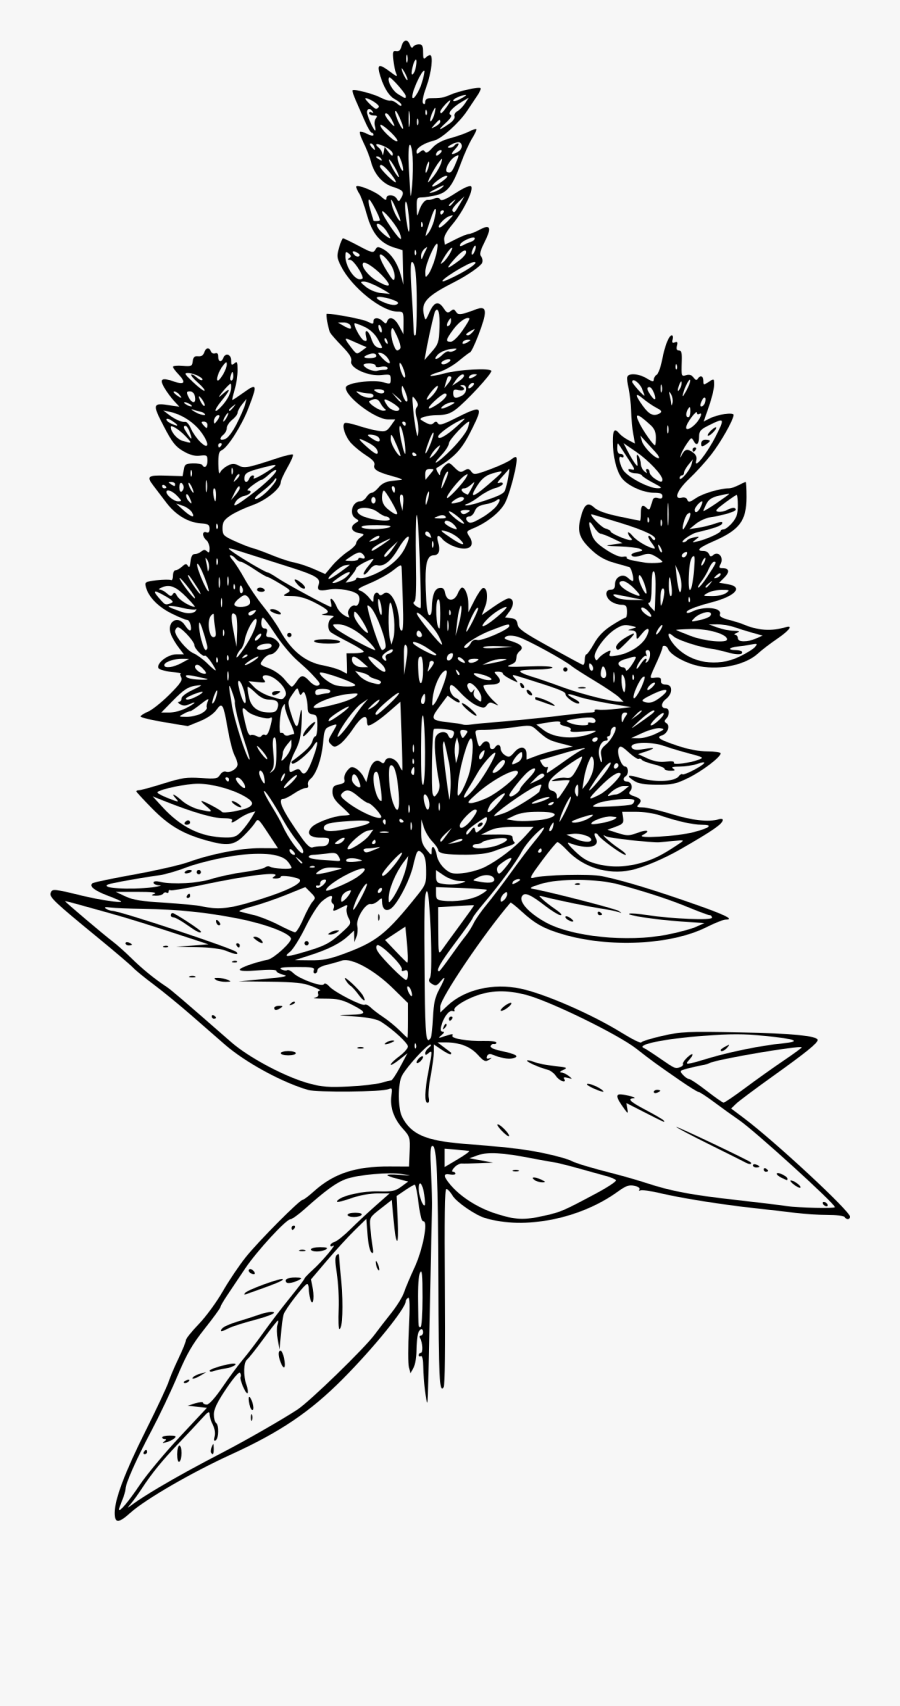 Transparent Hang Loose Png - Purple Loosestrife Black And White, Transparent Clipart